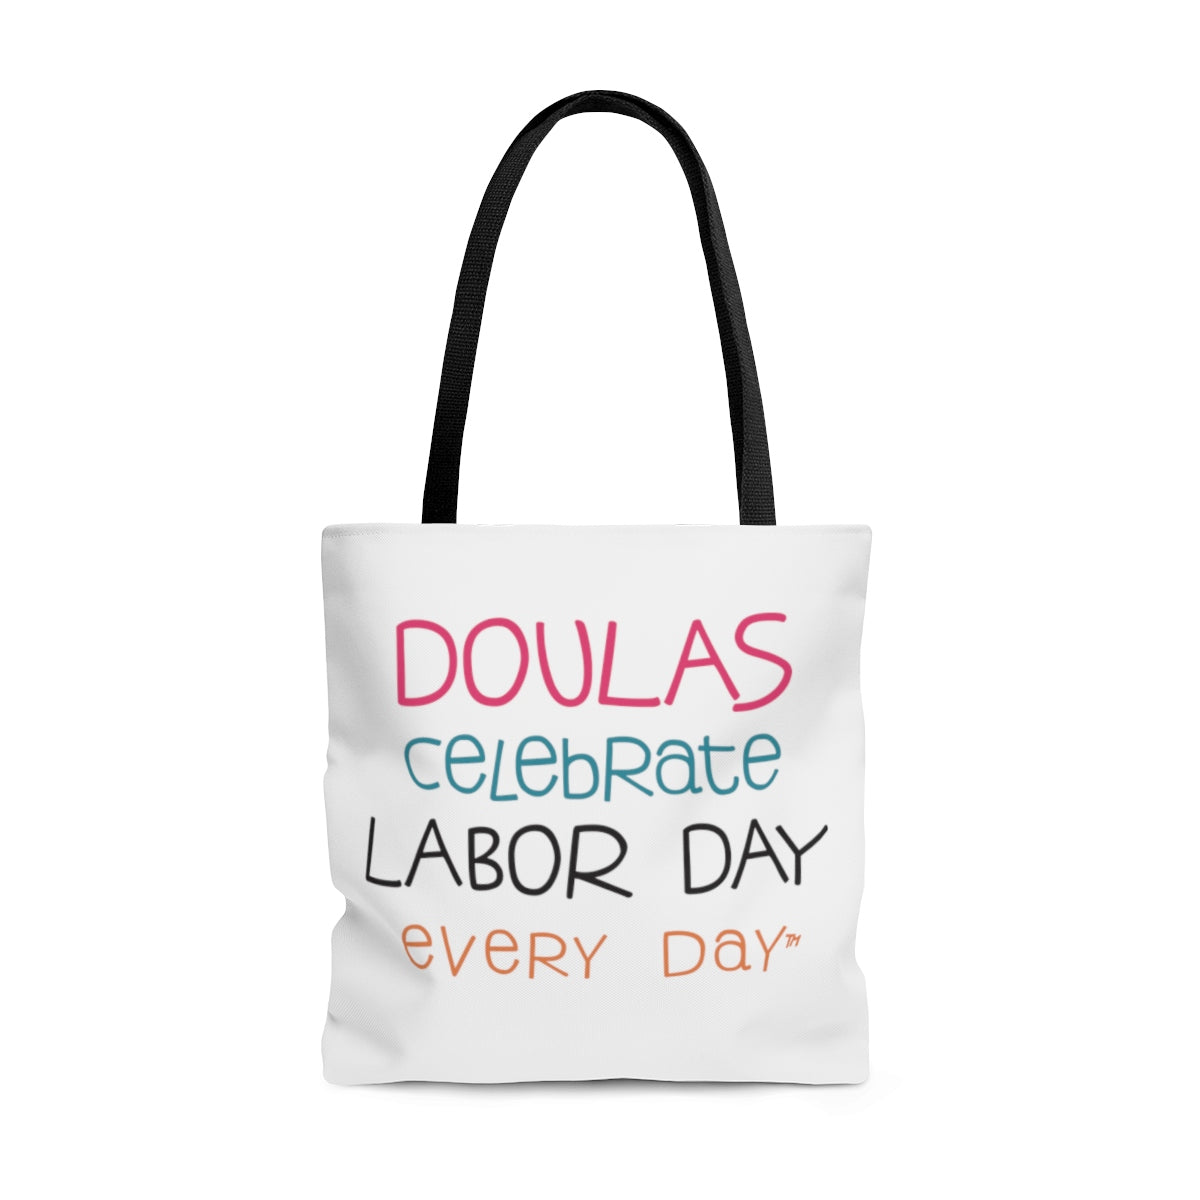 Doulas Celebrate Labor Day Every Day Tote Bag